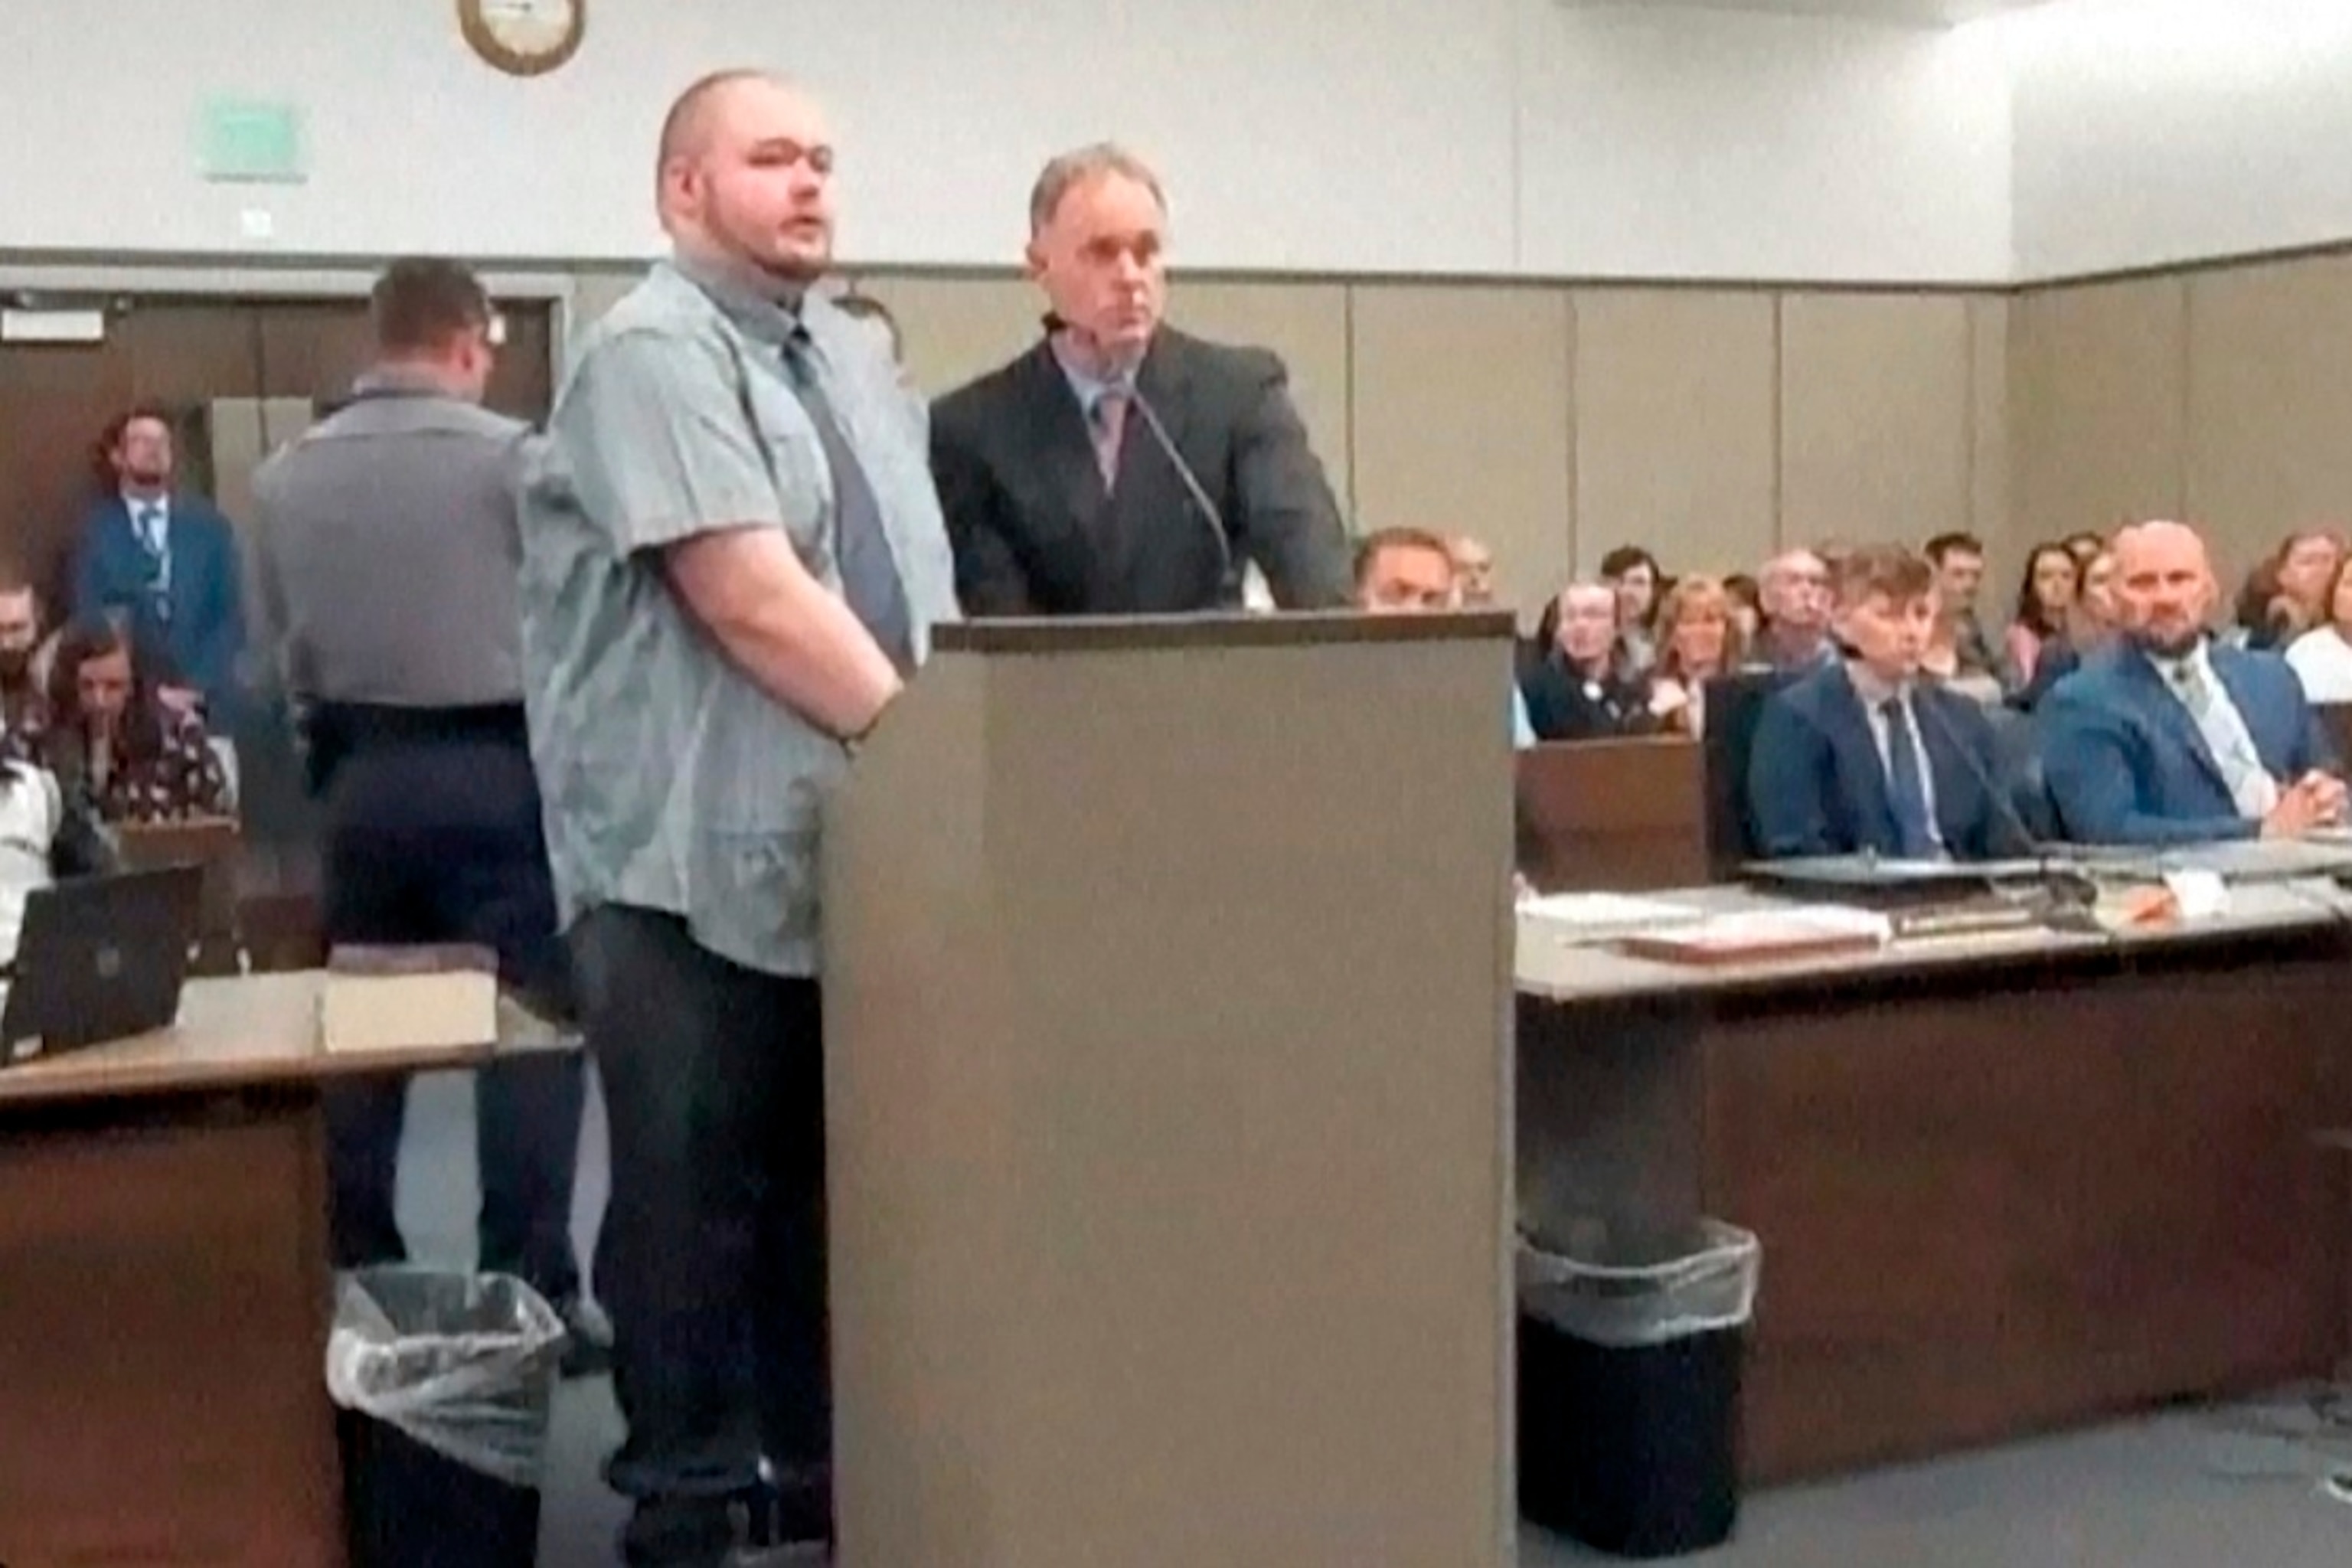 PHOTO: Anderson Lee Aldrich, left, the suspect in a mass shooting that killed five people at a Colorado Springs LGBTQ+ nightclub in 2022, appears in court, June 26, 2023, in Colorado Springs, CO,  Jan. 17, 2024.